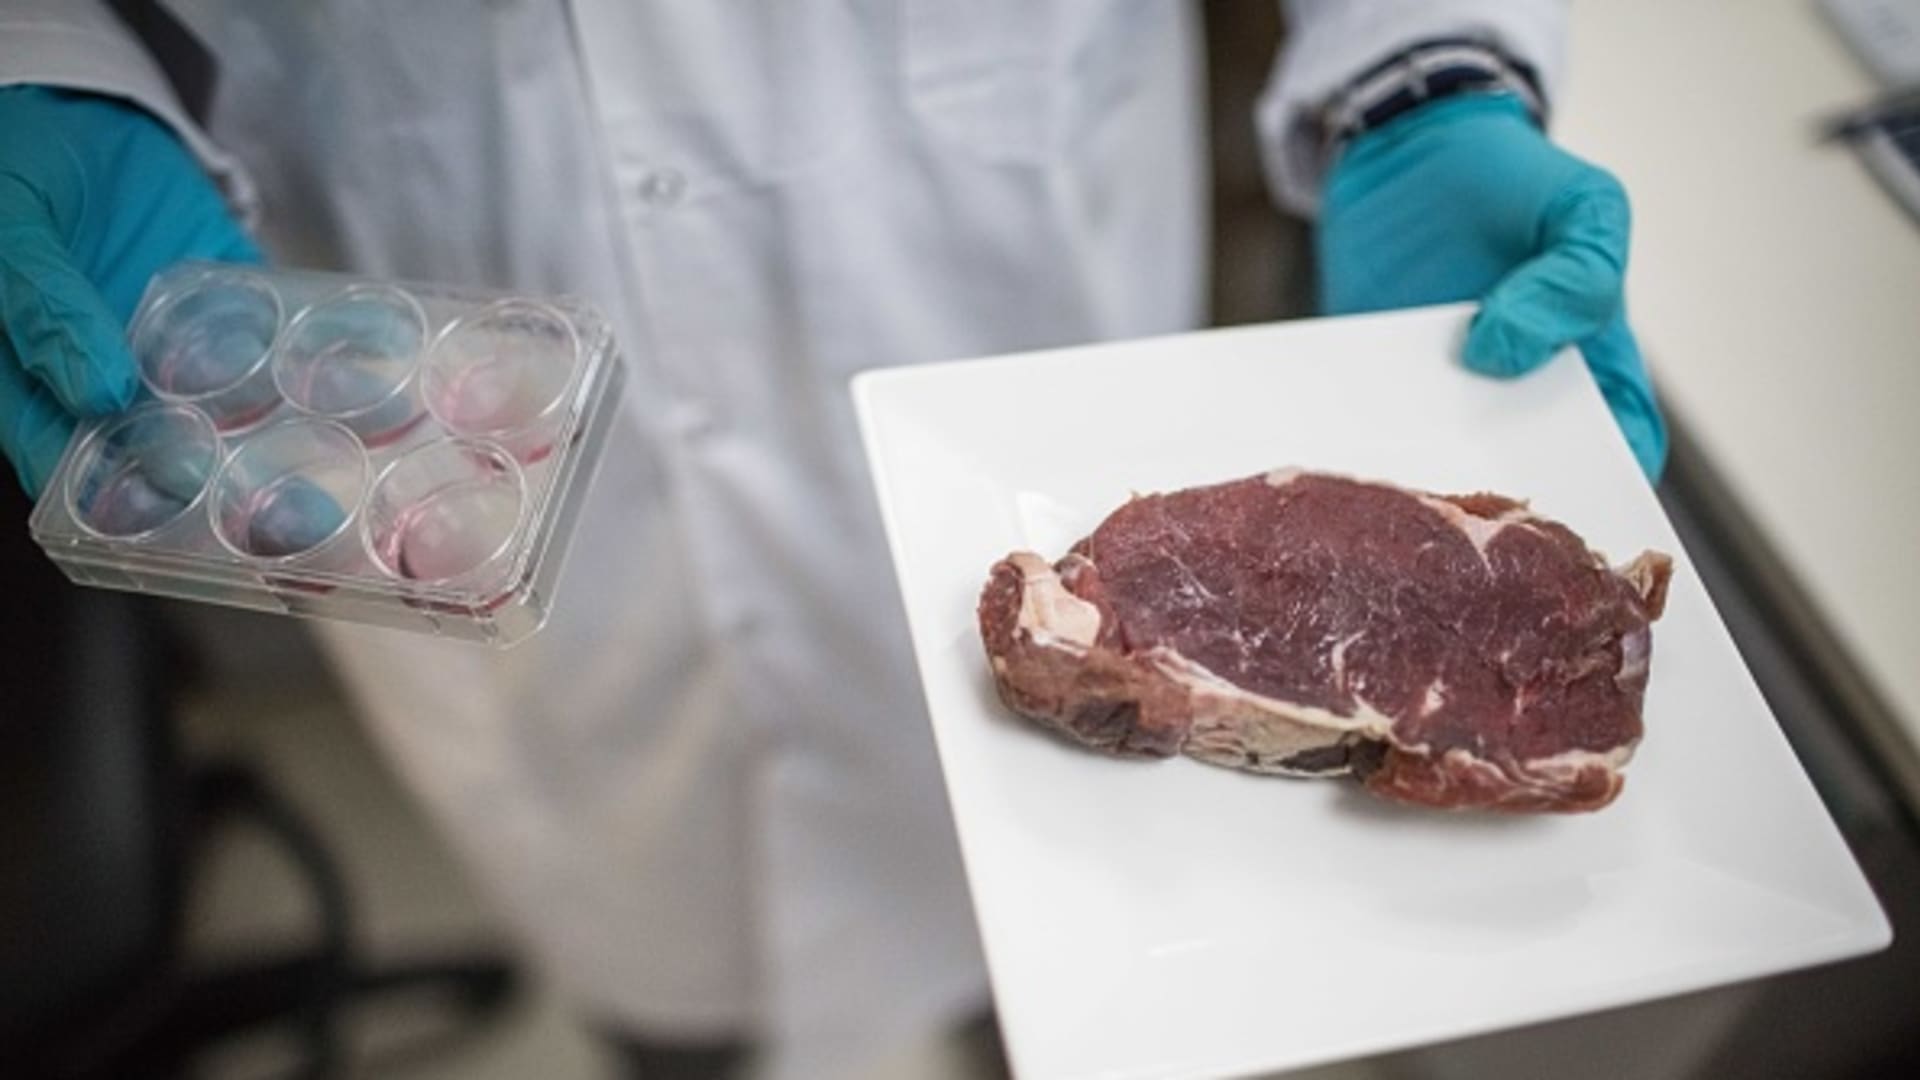 Investors bet on meat grown in a lab as interest in plant-based foods cools